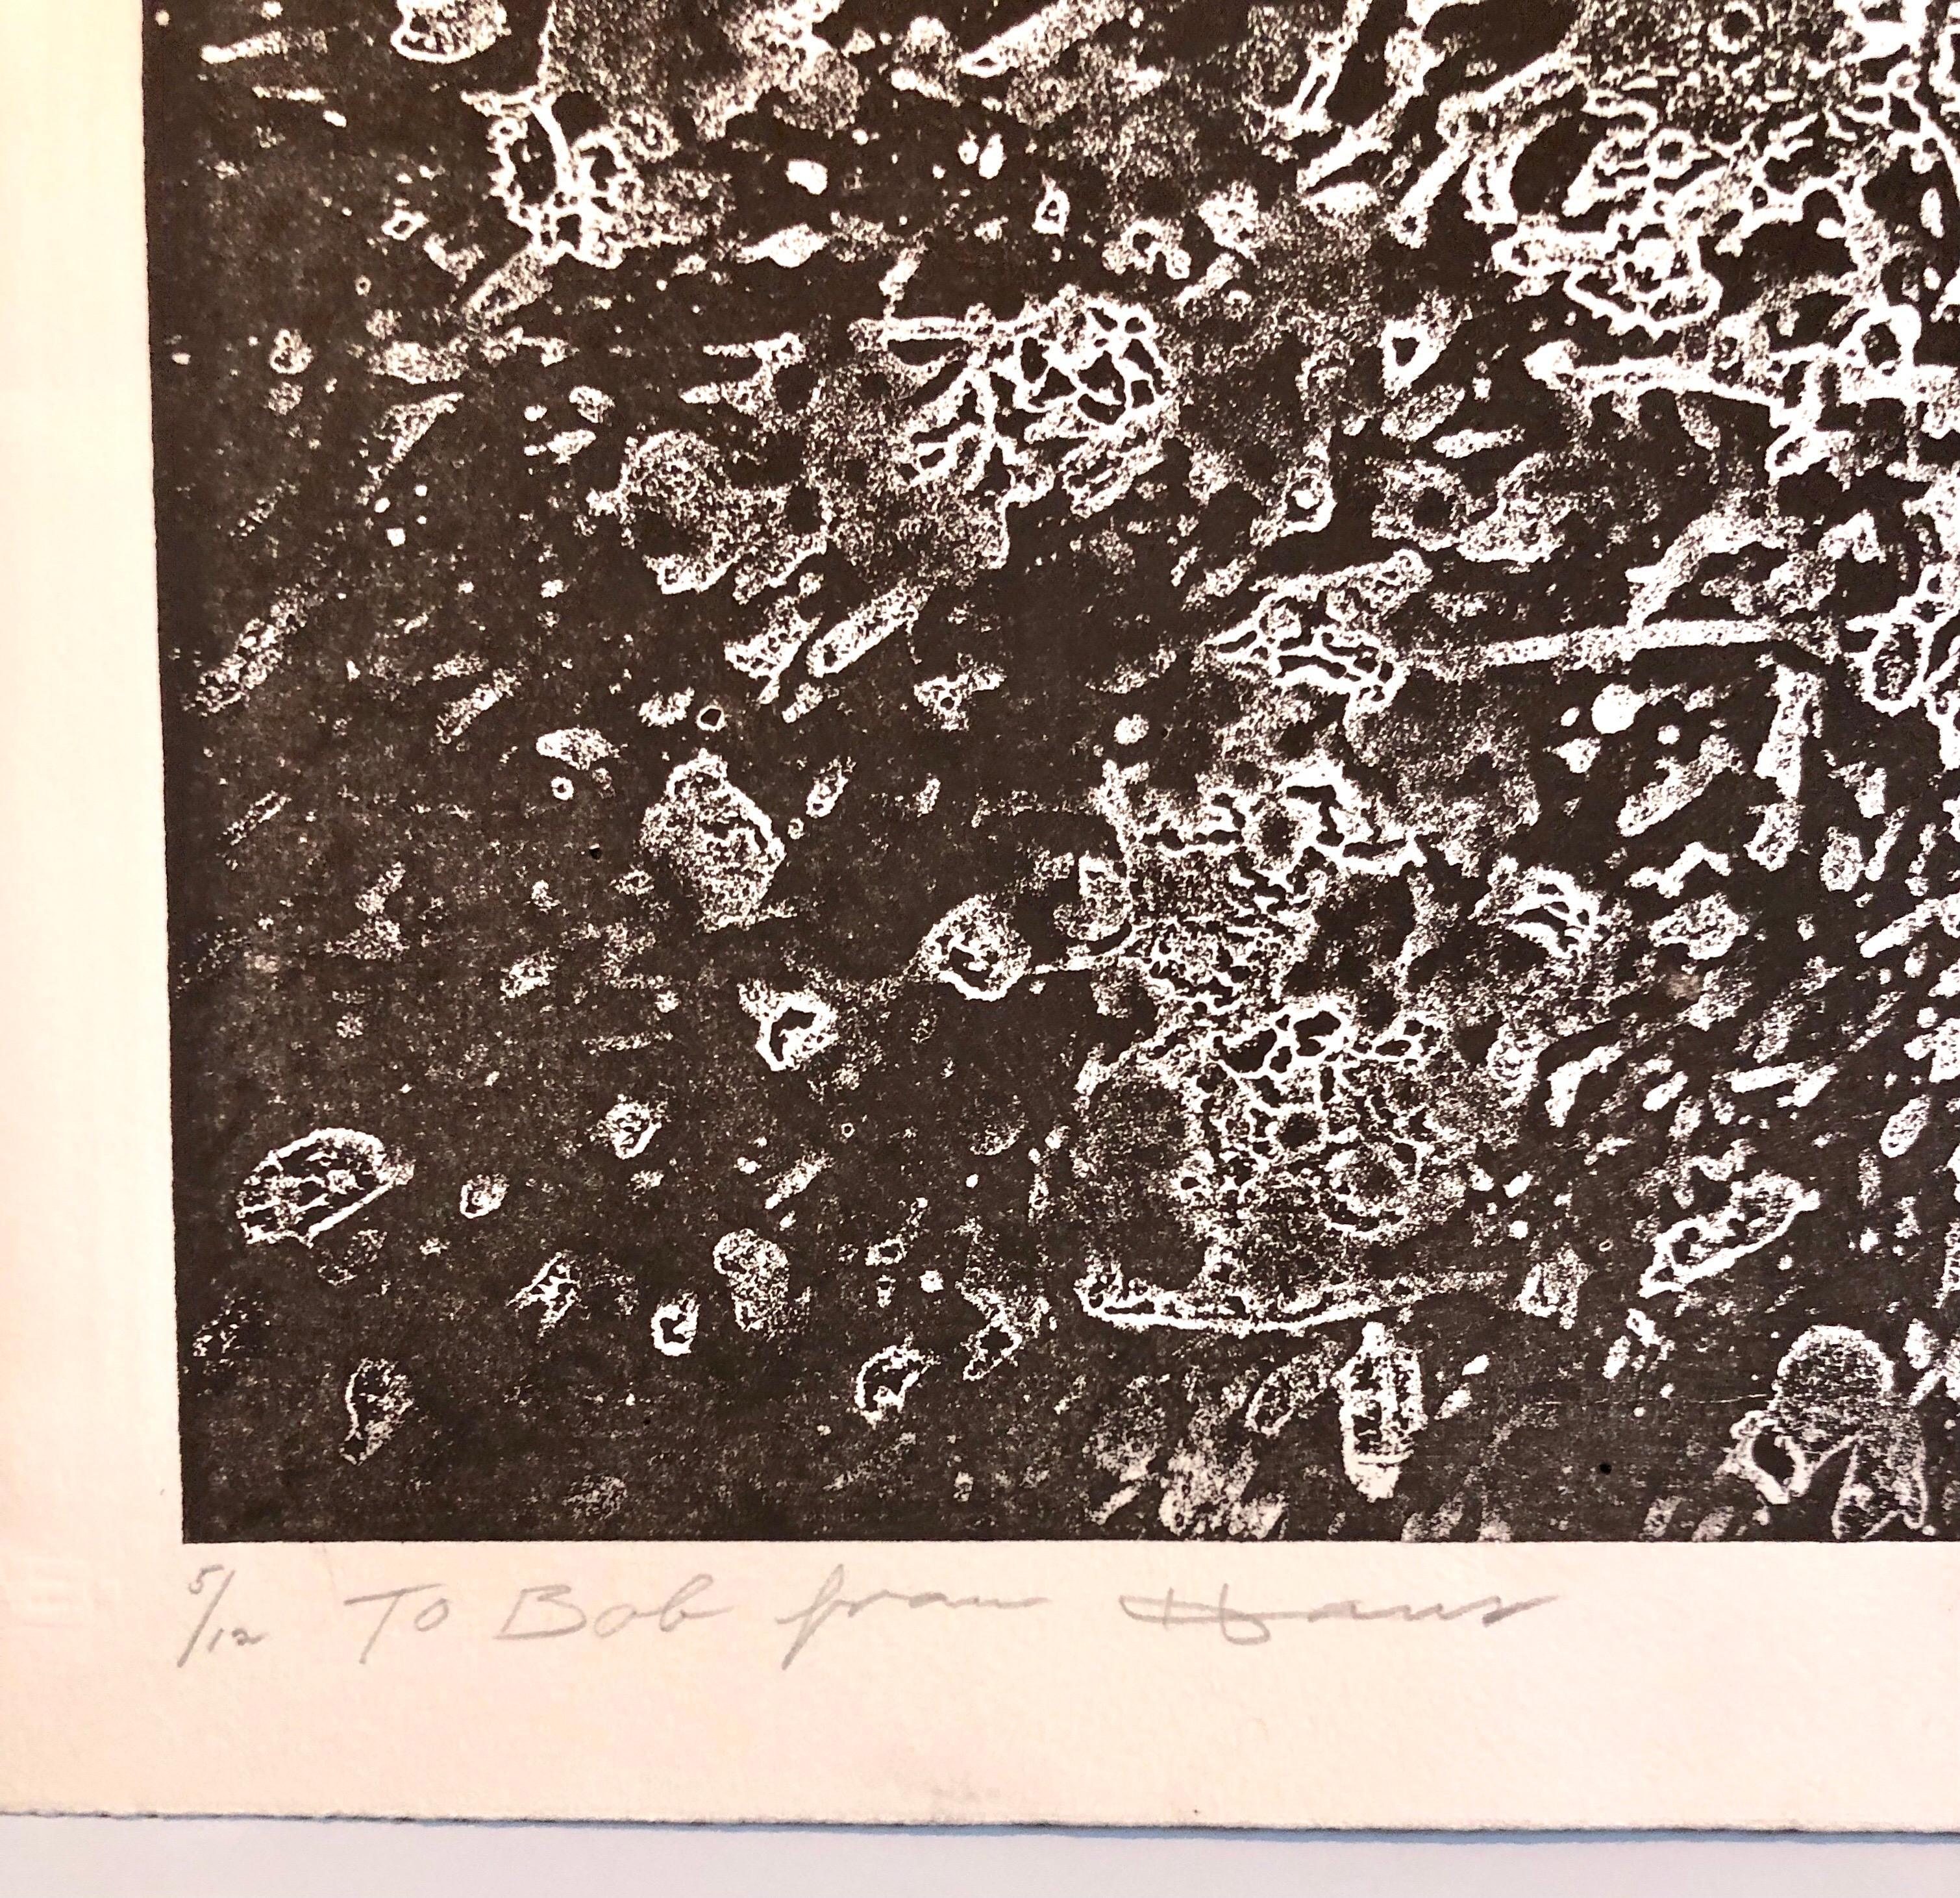  Untitled, 1983, lithograph printed in sepia ink, 
Hand signed and dated lower right, numbered in pencil with the artist's chop mark lower left, inscribed 
by artist. From a series of experimental abstract linocuts done in 1983. These are very small